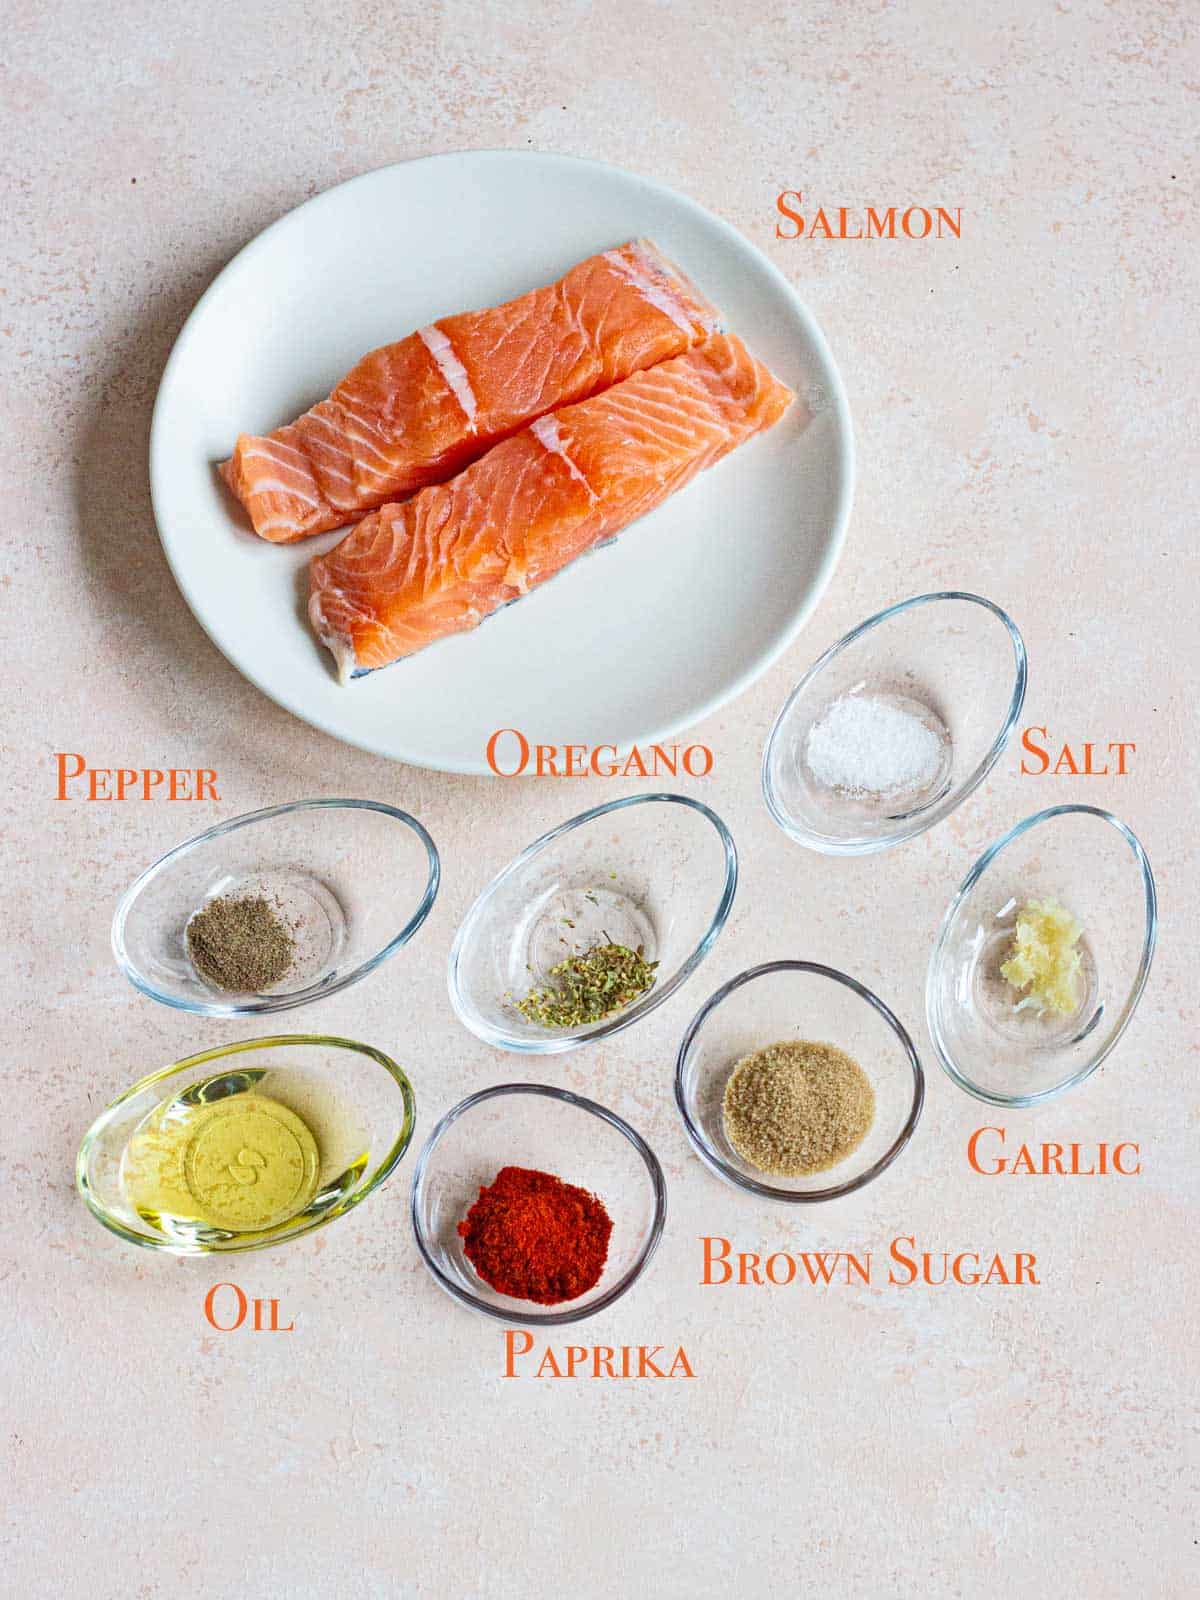 All the ingredients for Can You Put Salmon in the Air Fryer? Yes, you can!